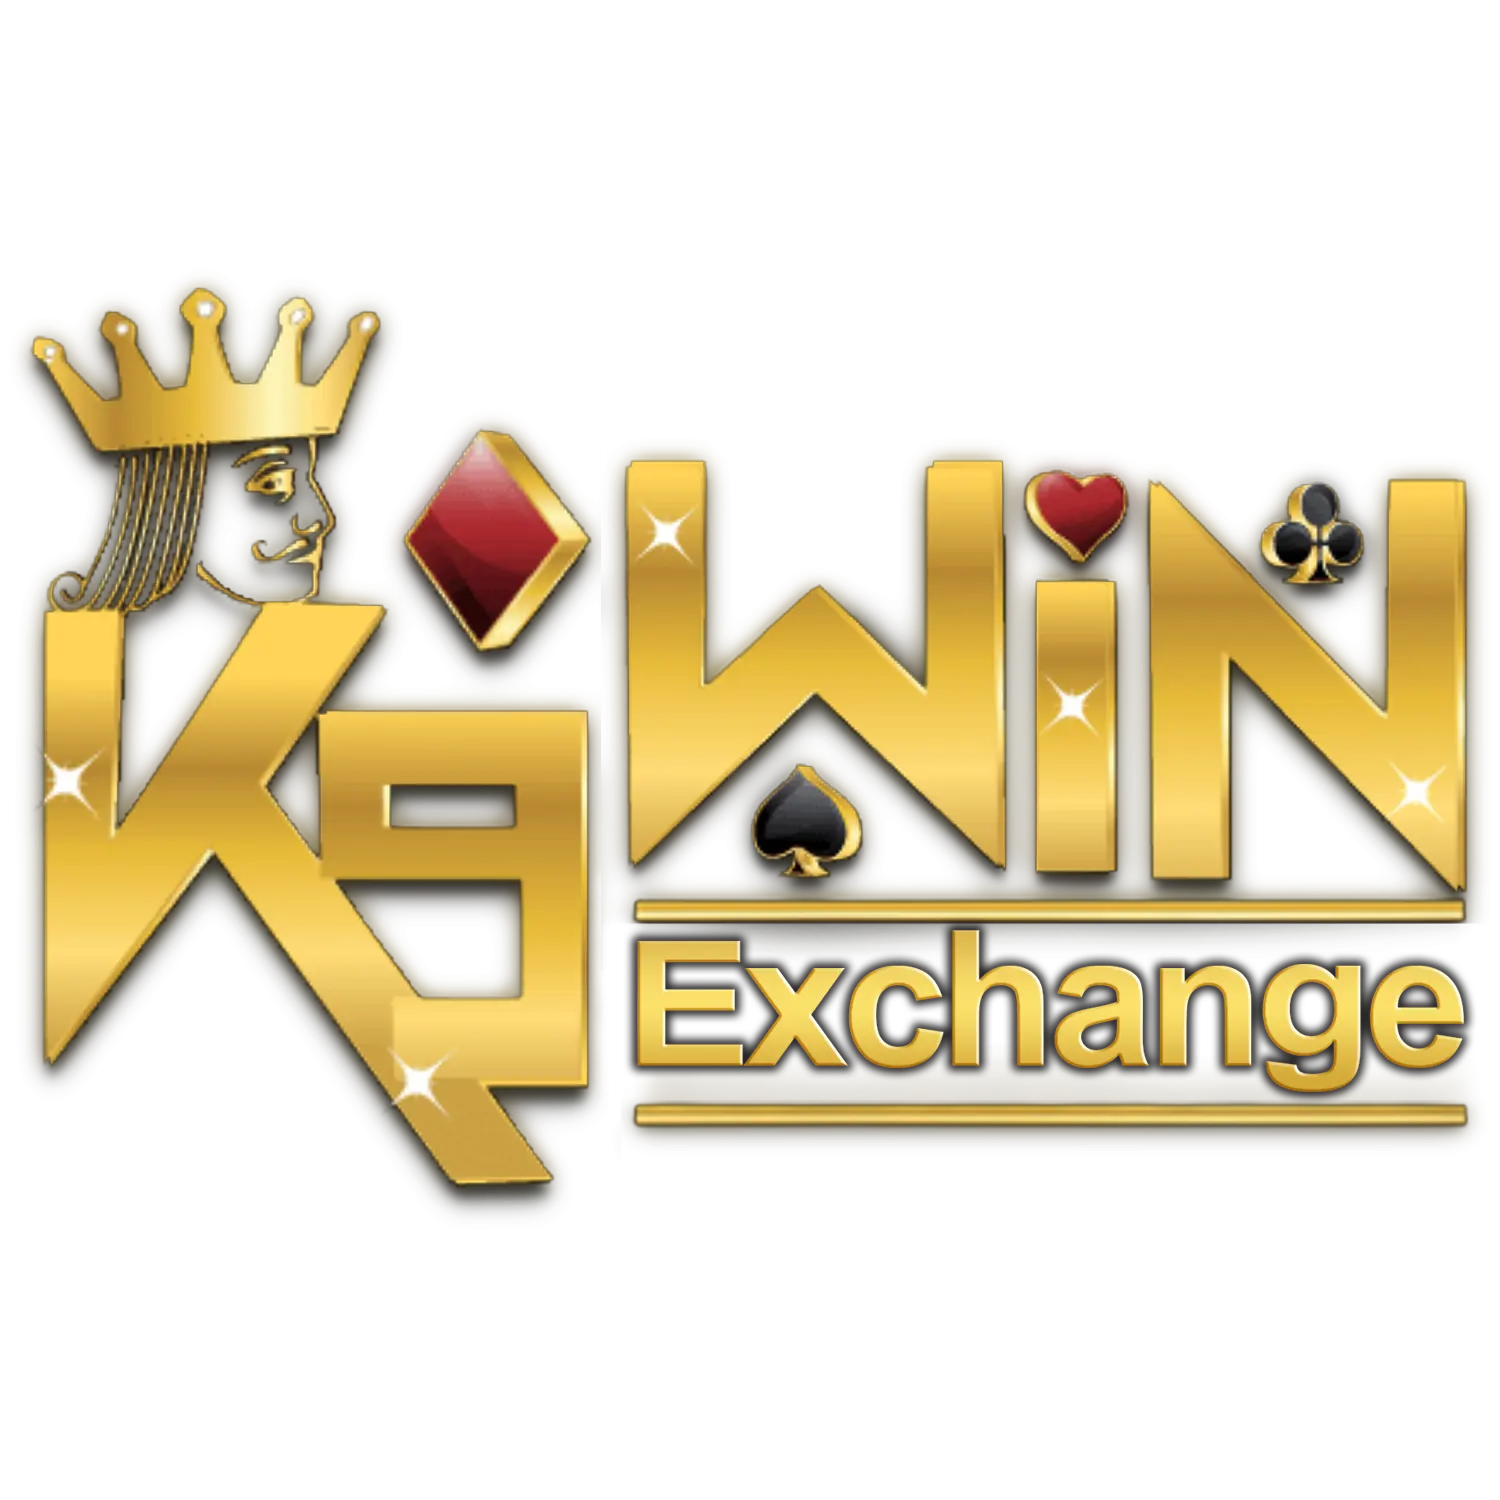 Play casino games and bet at K9Win.